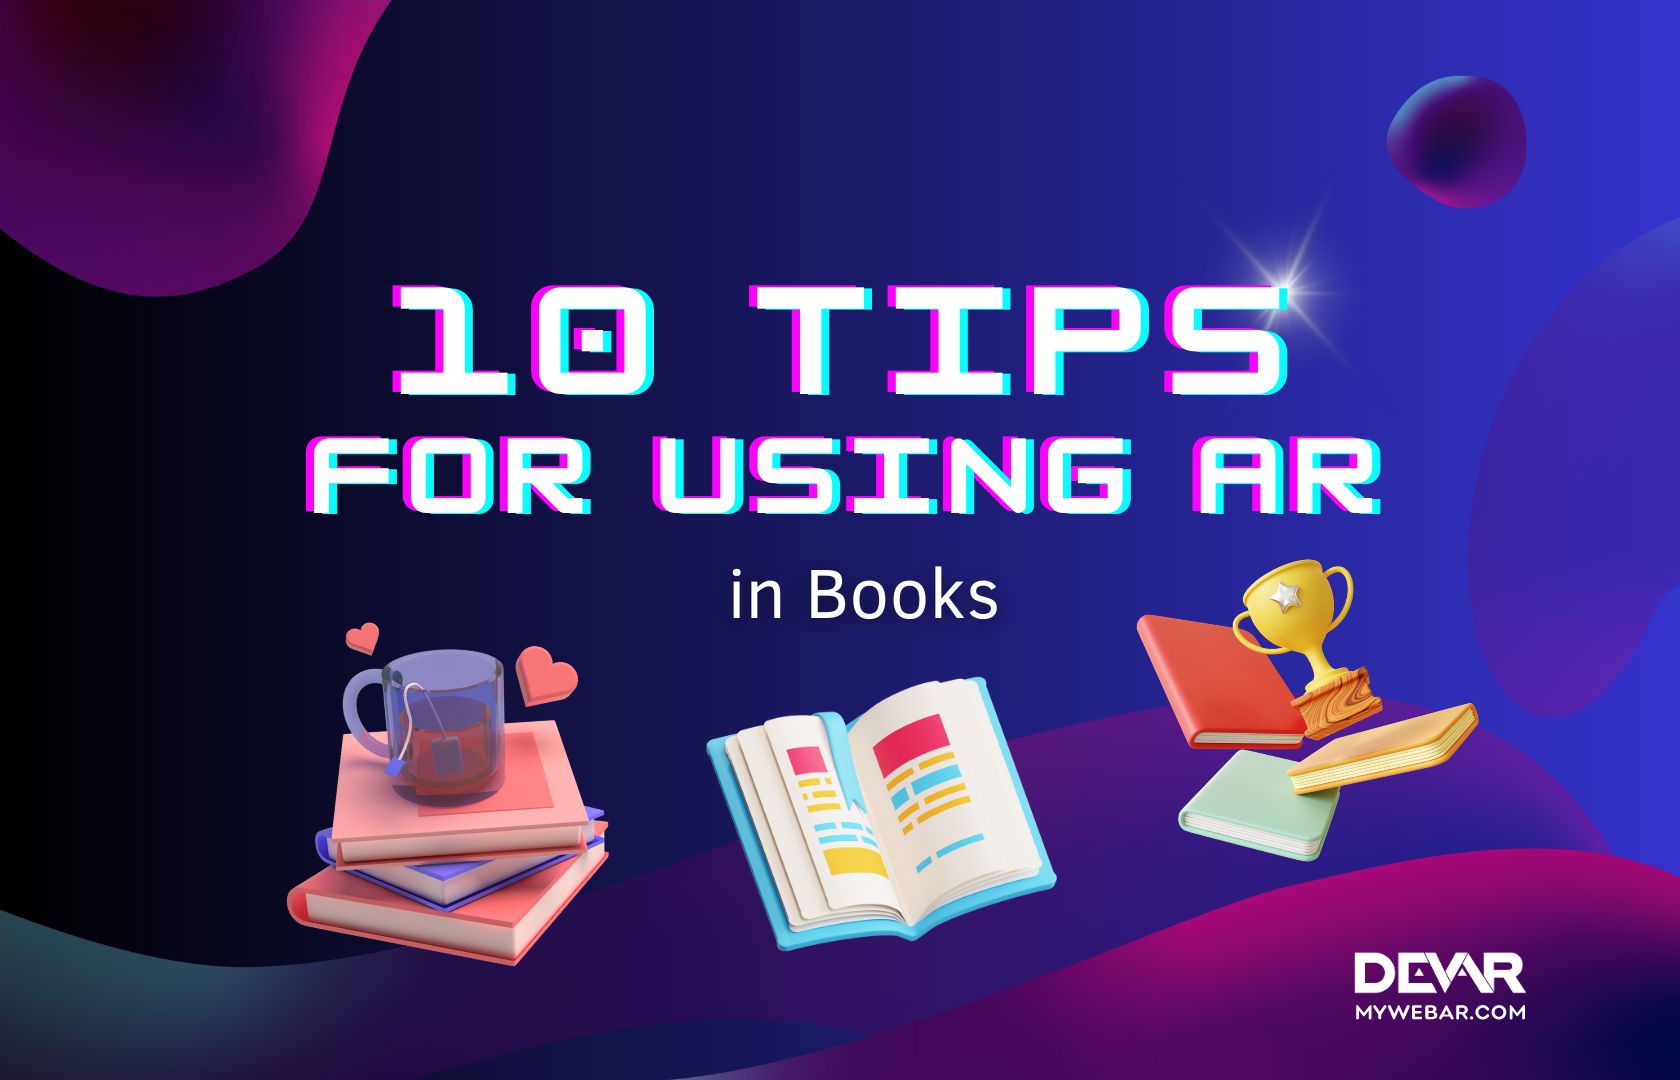 10 Tips for Using AR in Books